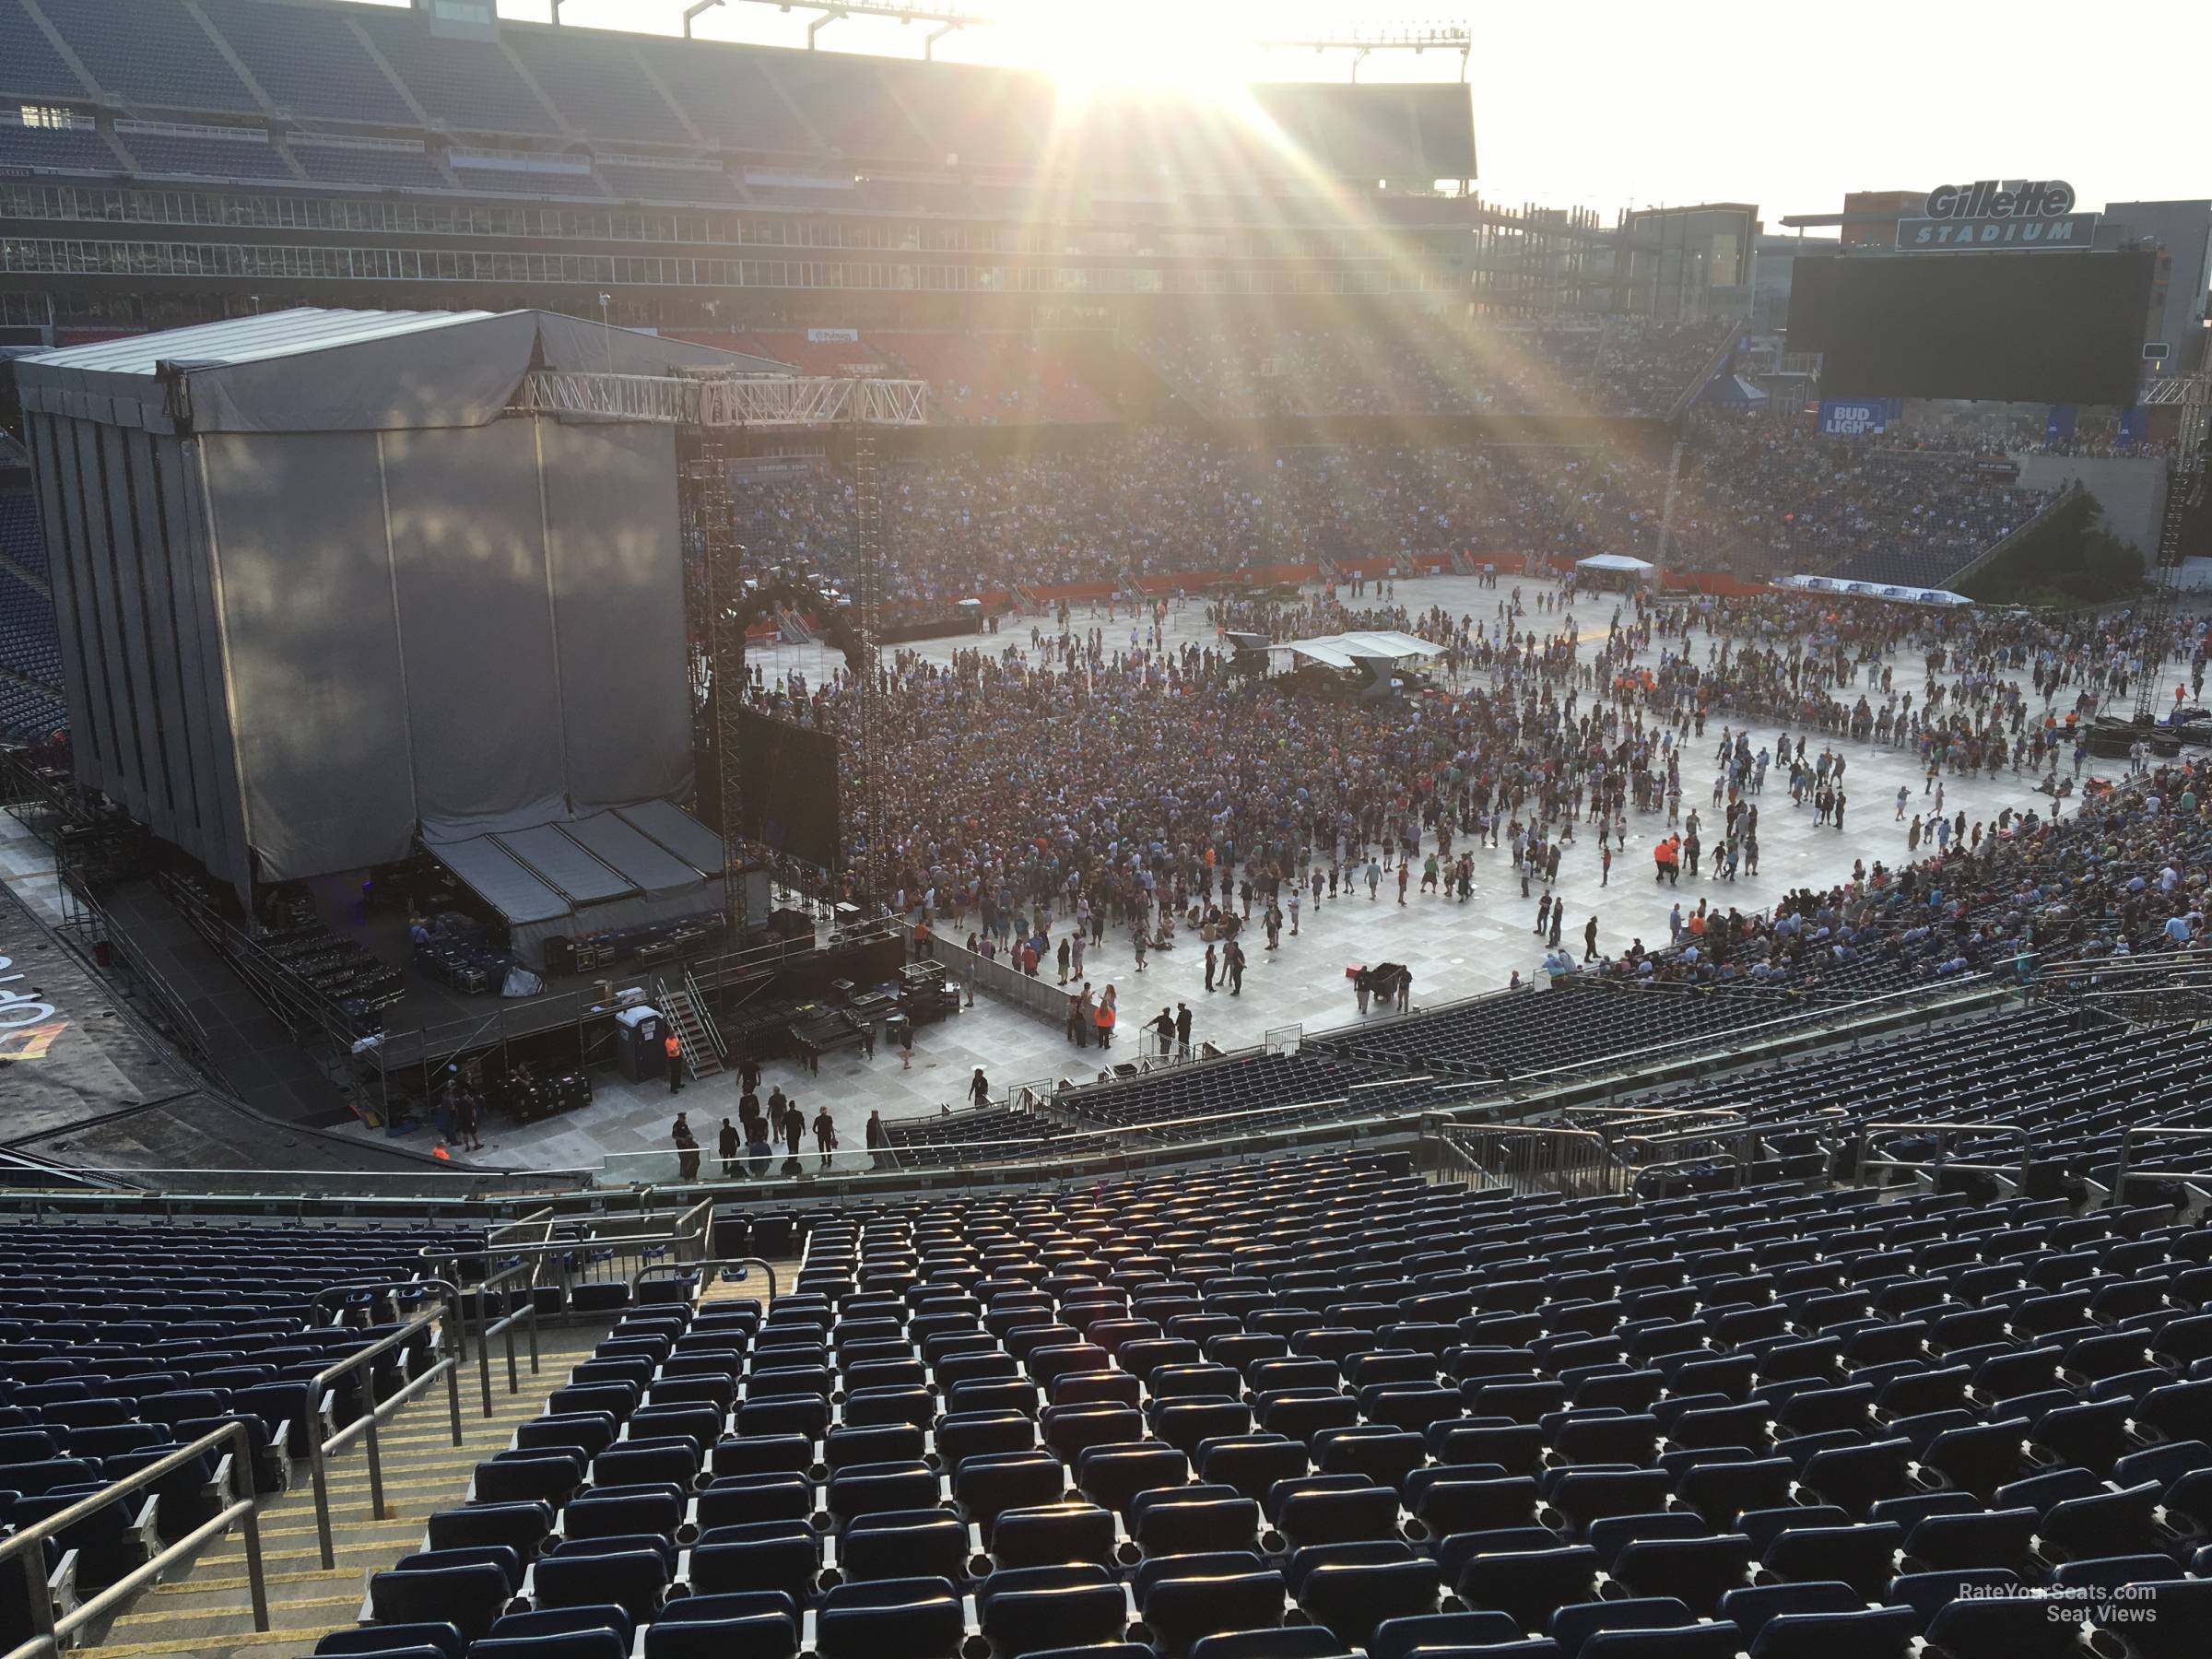 section 215, row 27 seat view  for concert - gillette stadium